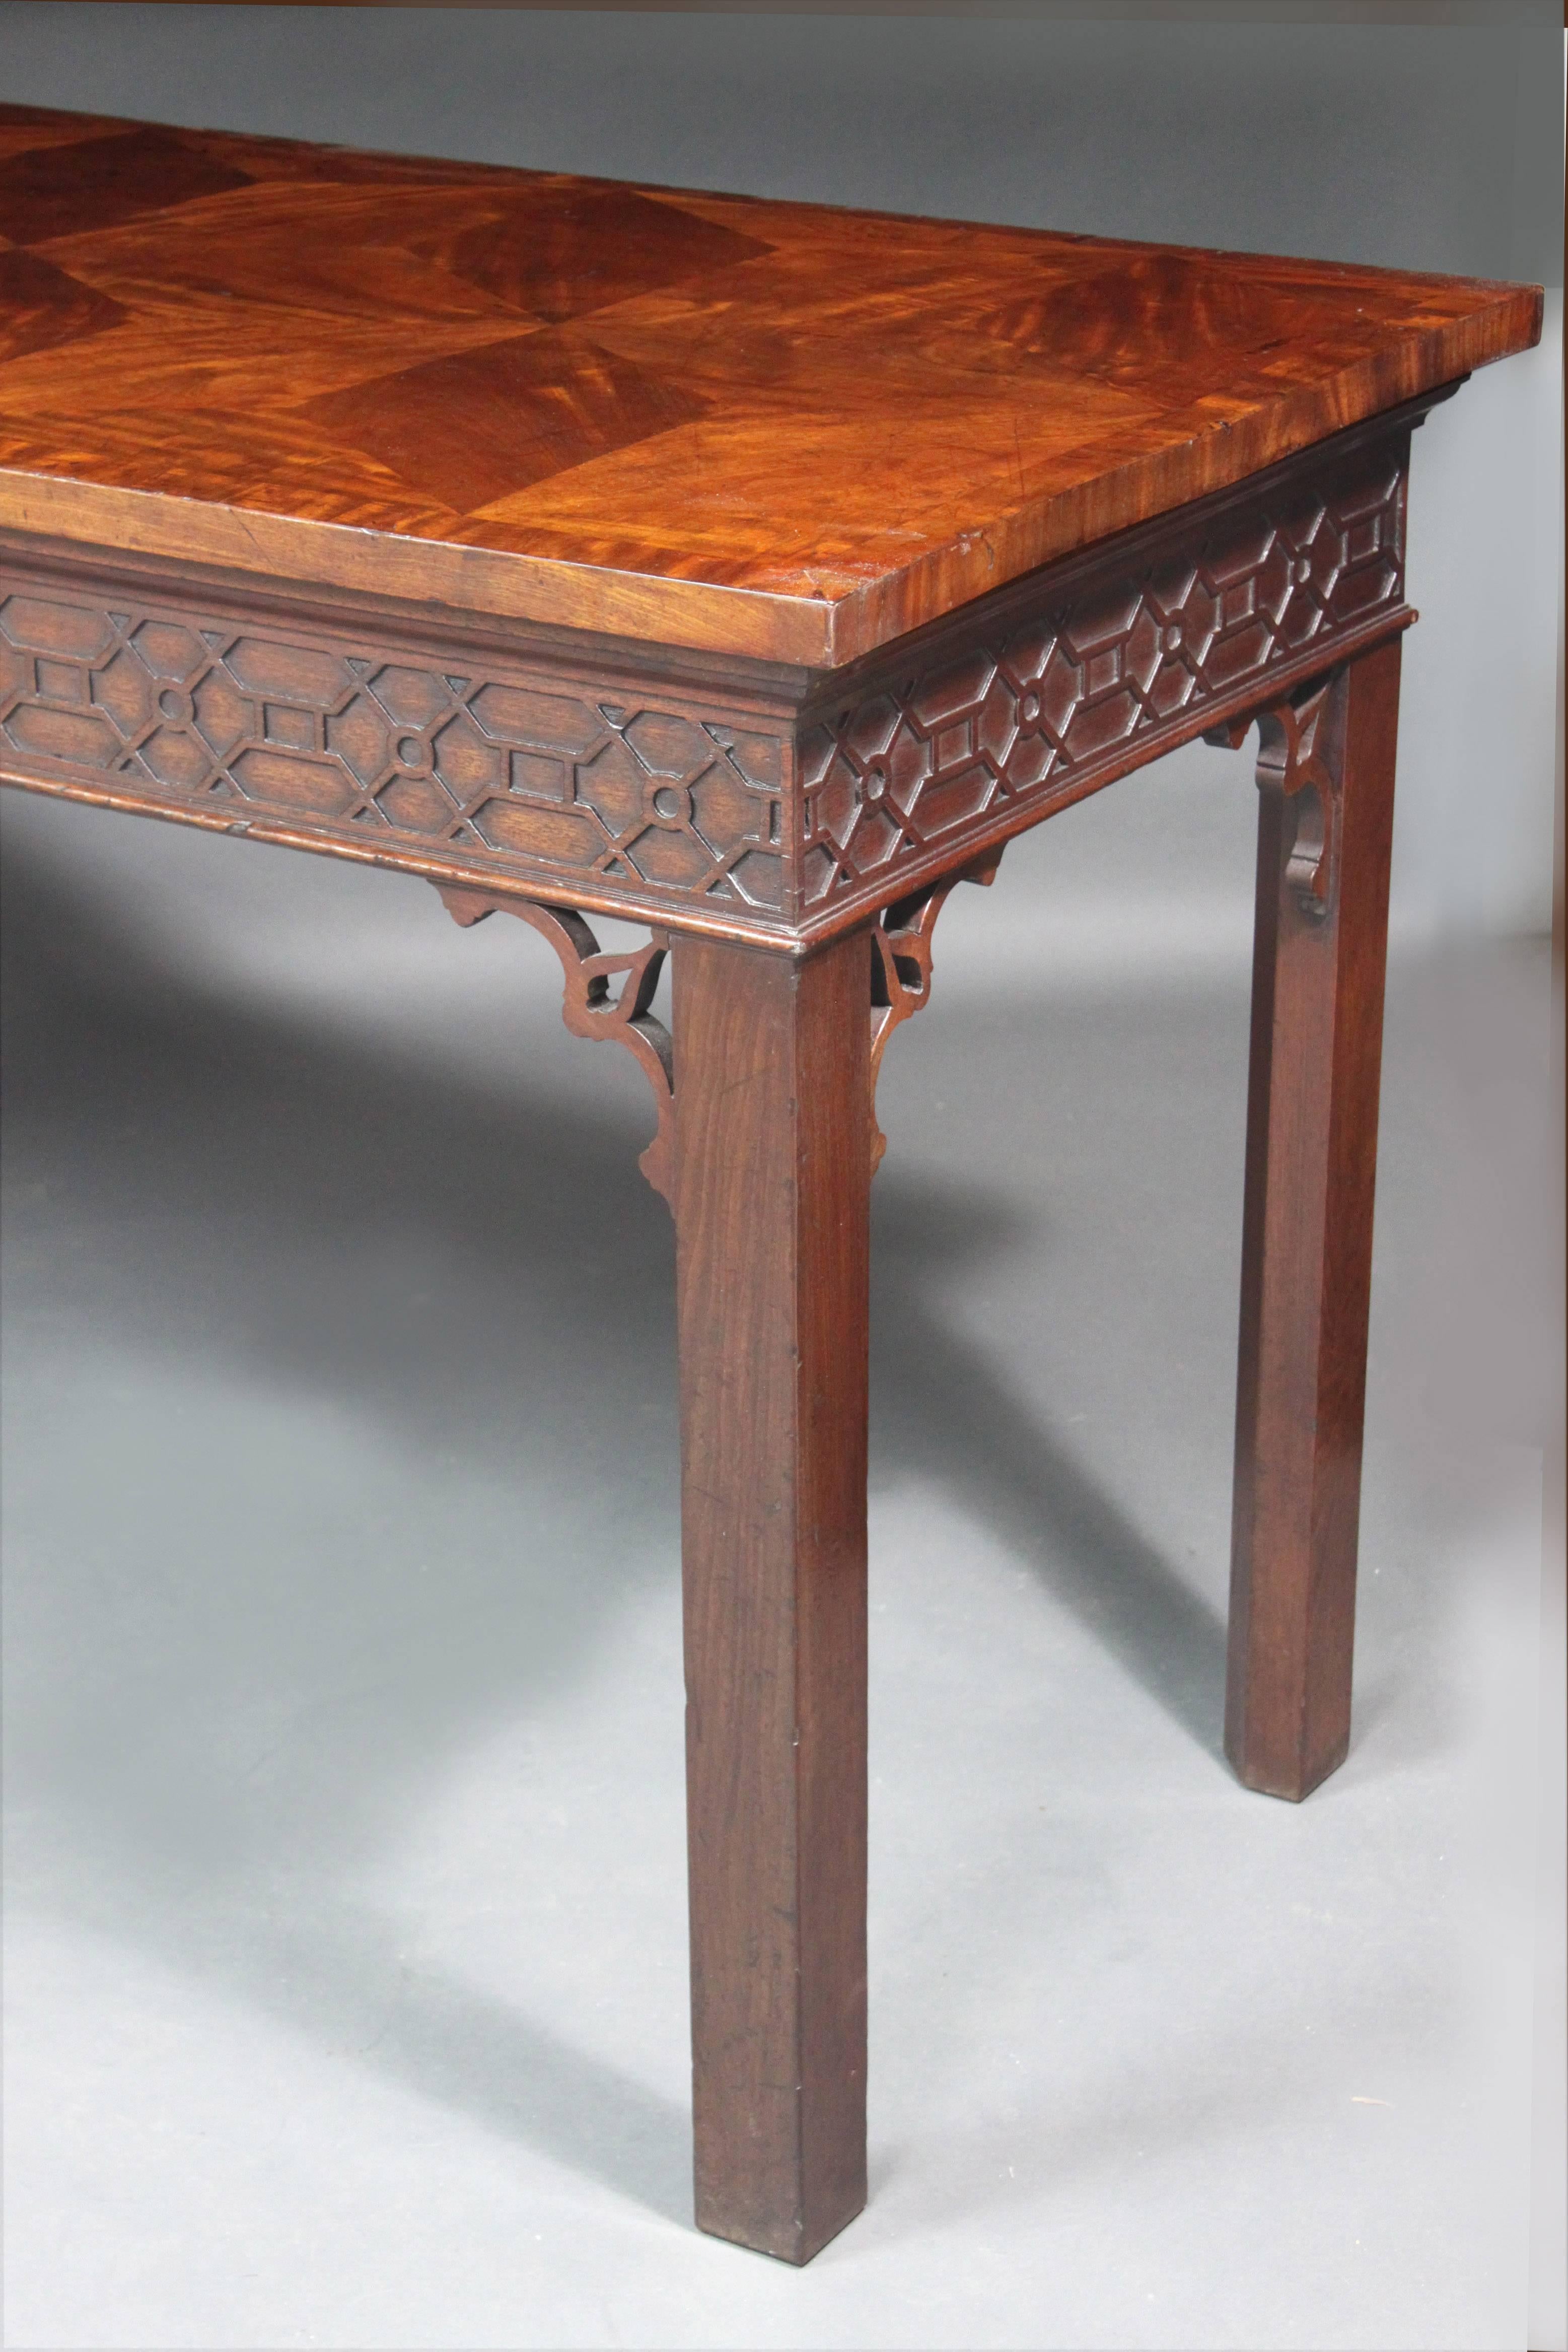 Chippendale Serving Table with a Parquetry Top In Good Condition For Sale In Bradford-on-Avon, Wiltshire